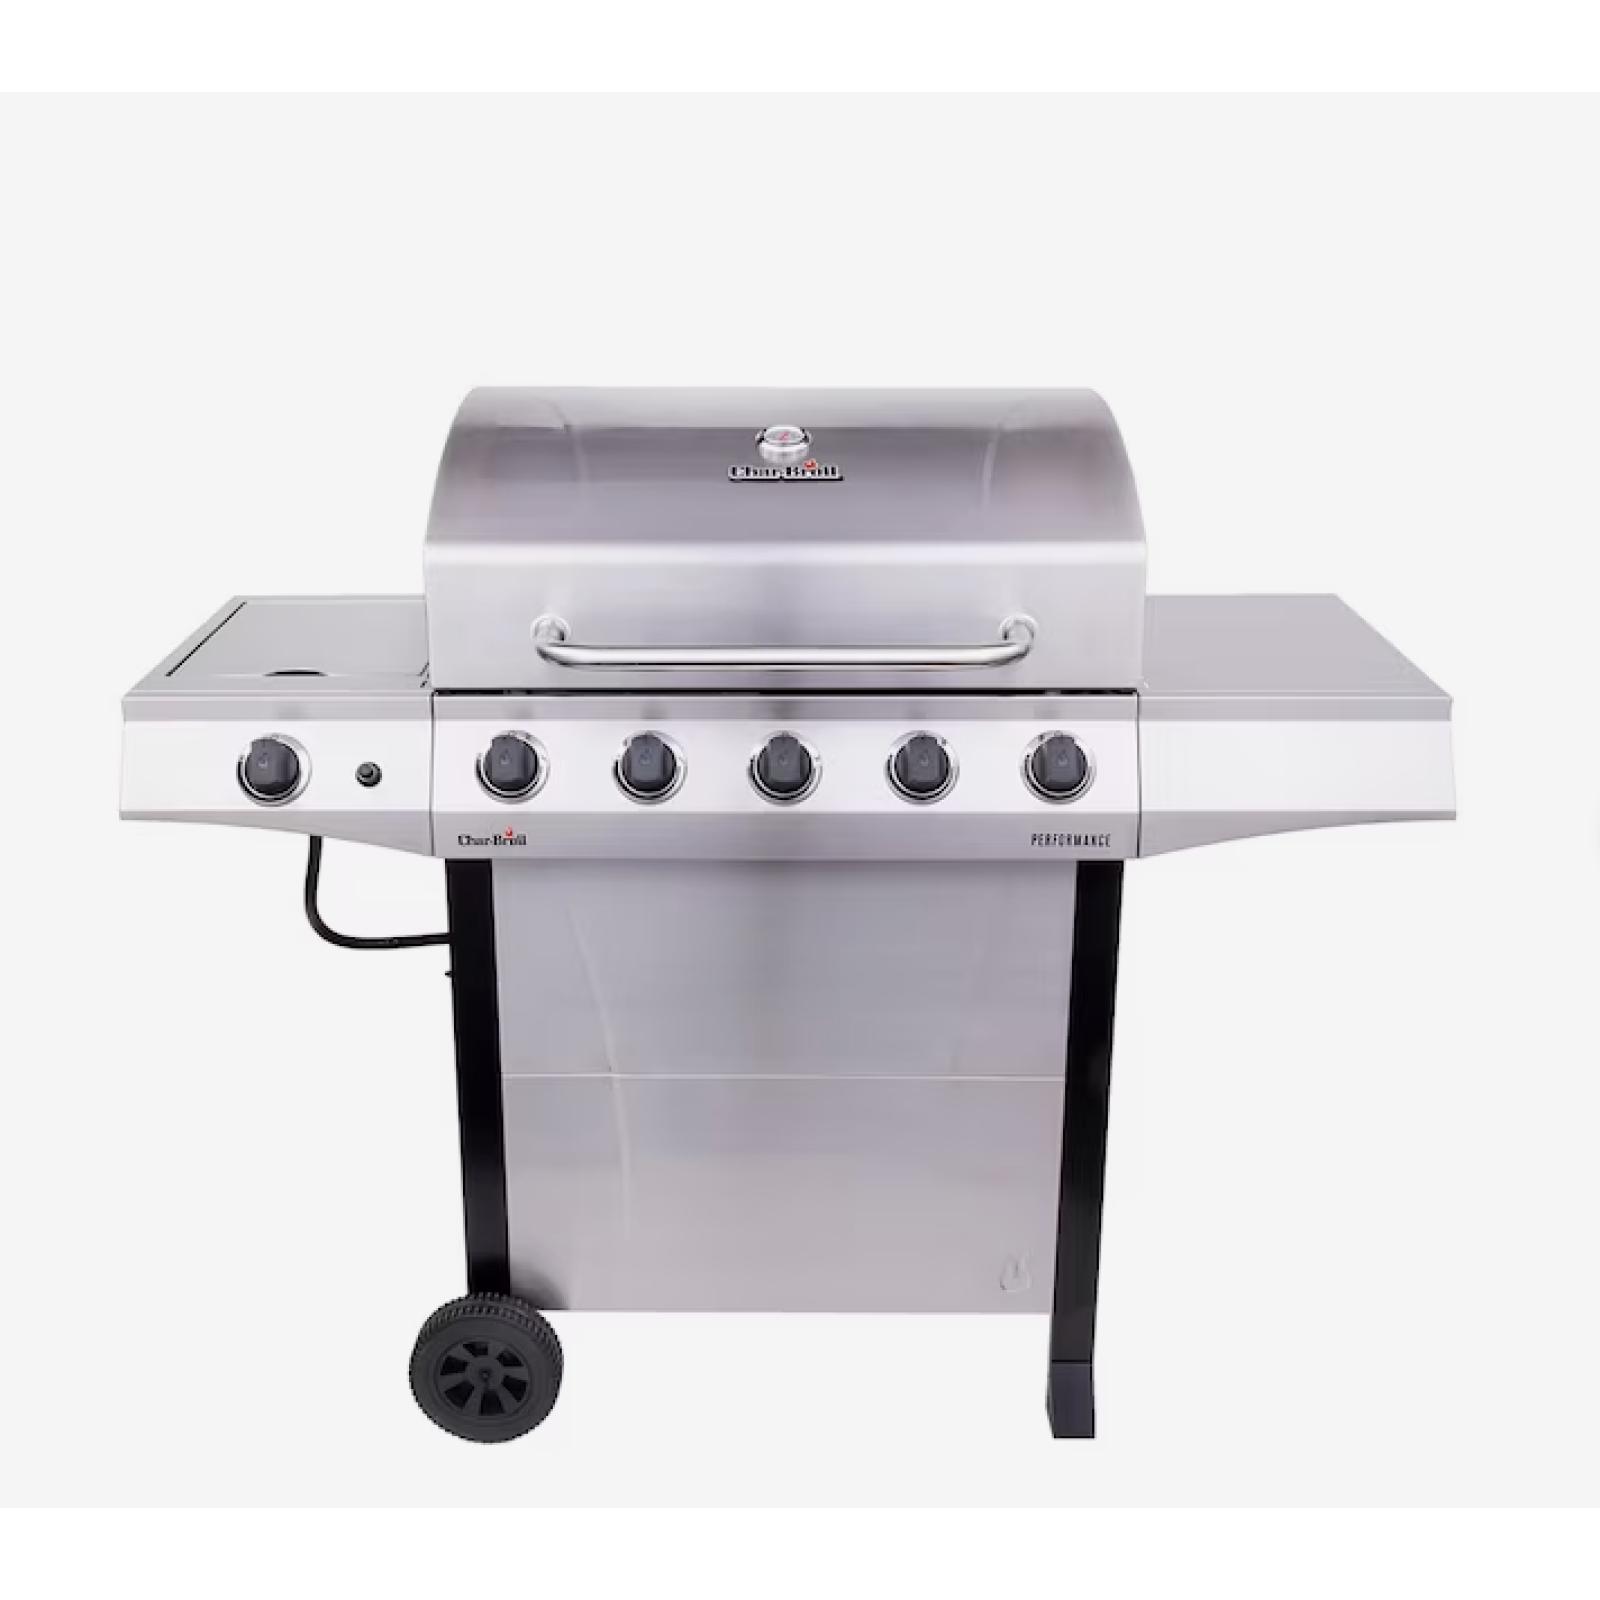 DALLAS LOCATION - Char-Broil Performance Series Silver 5-Burner Liquid Propane Gas Grill with 1 Side Burner PALLET - (6 UNITS)